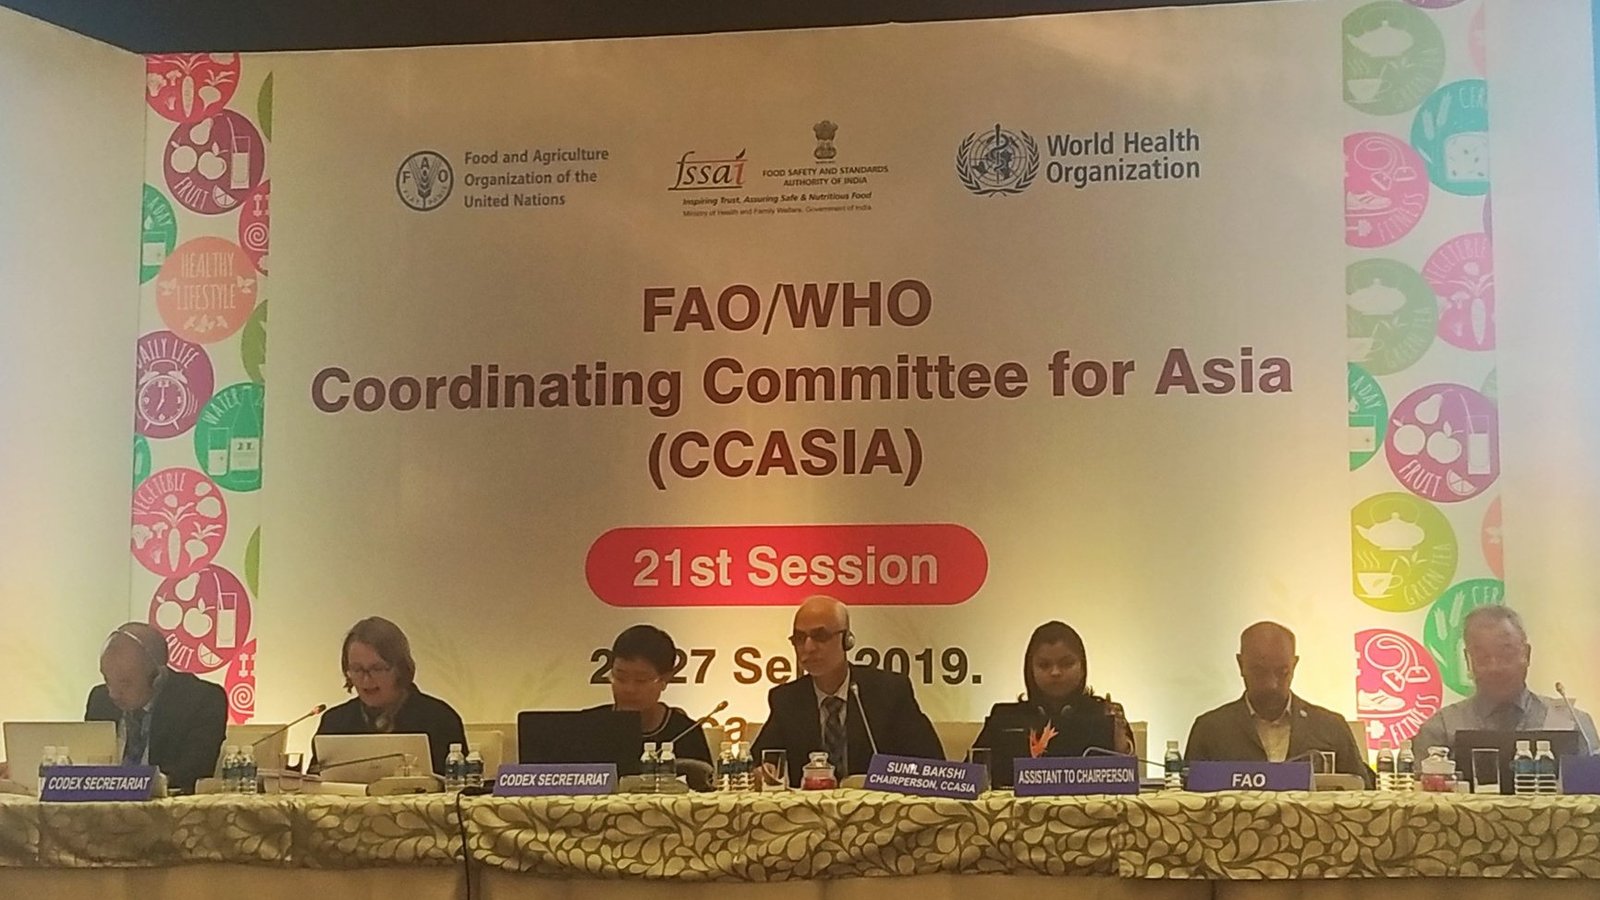 21st-session-of-who-fao-coordinating-committee-of-asia-begins-in-goa